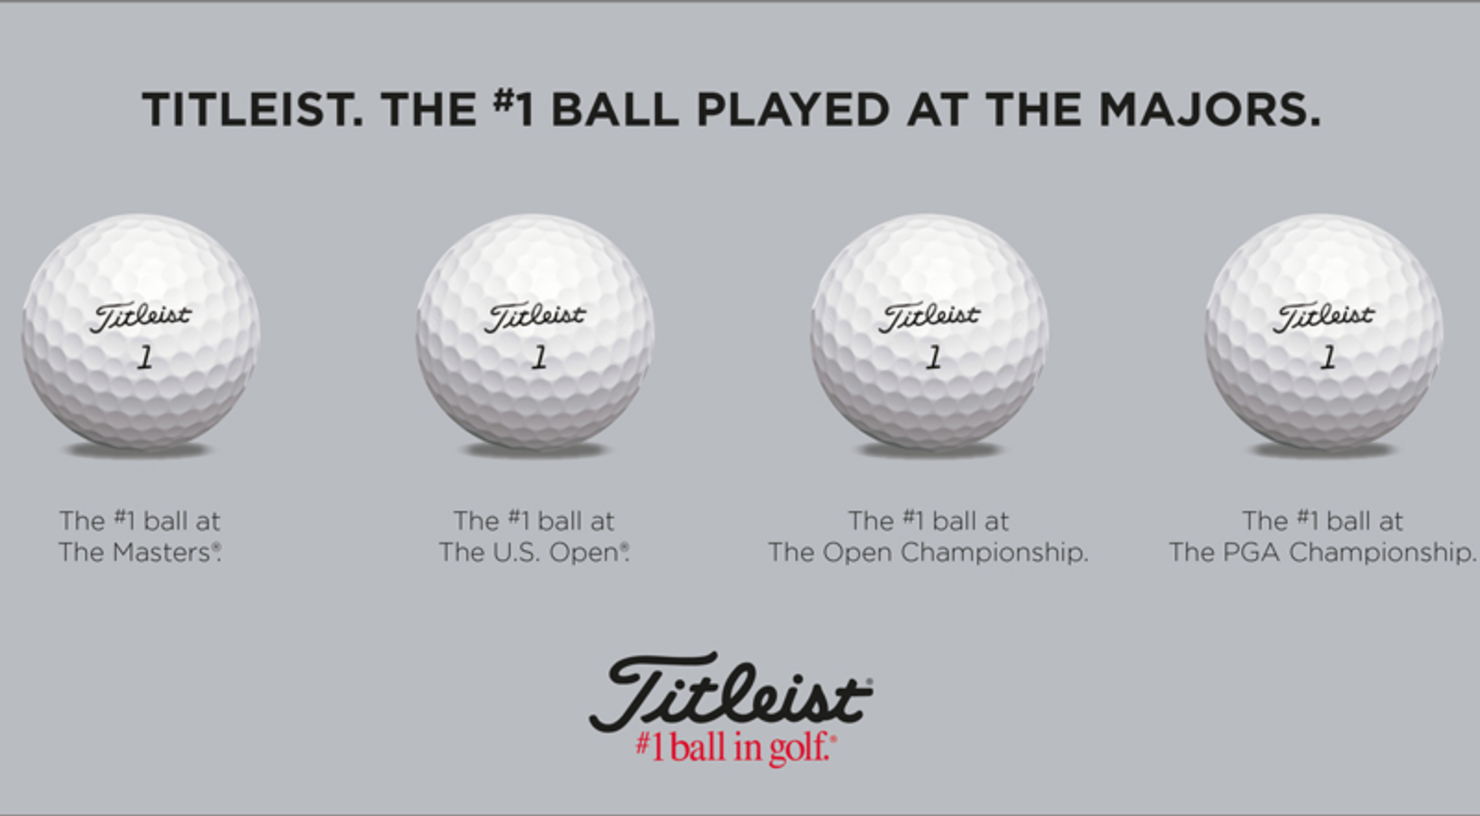 titleist, the number one ball in golf marketing claim